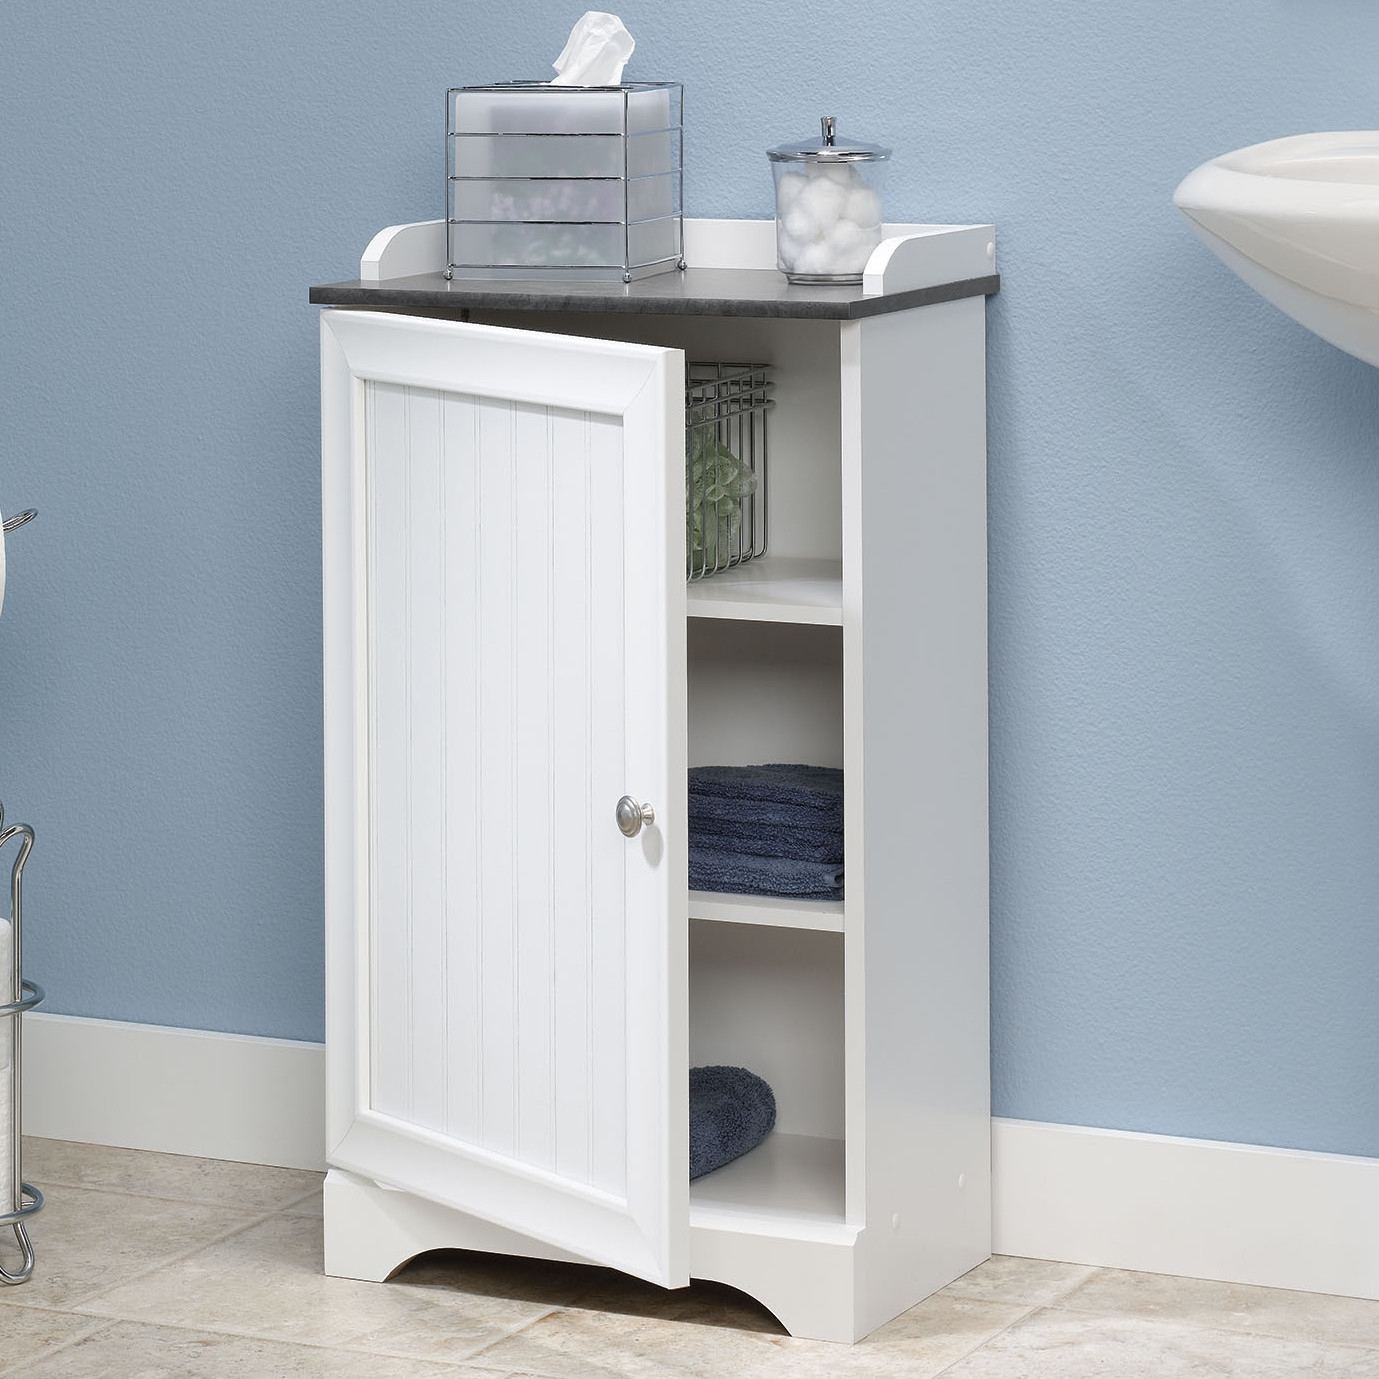 Bathroom Floor Cabinet With Adjustable Shelves In White Finish inside proportions 1379 X 1379